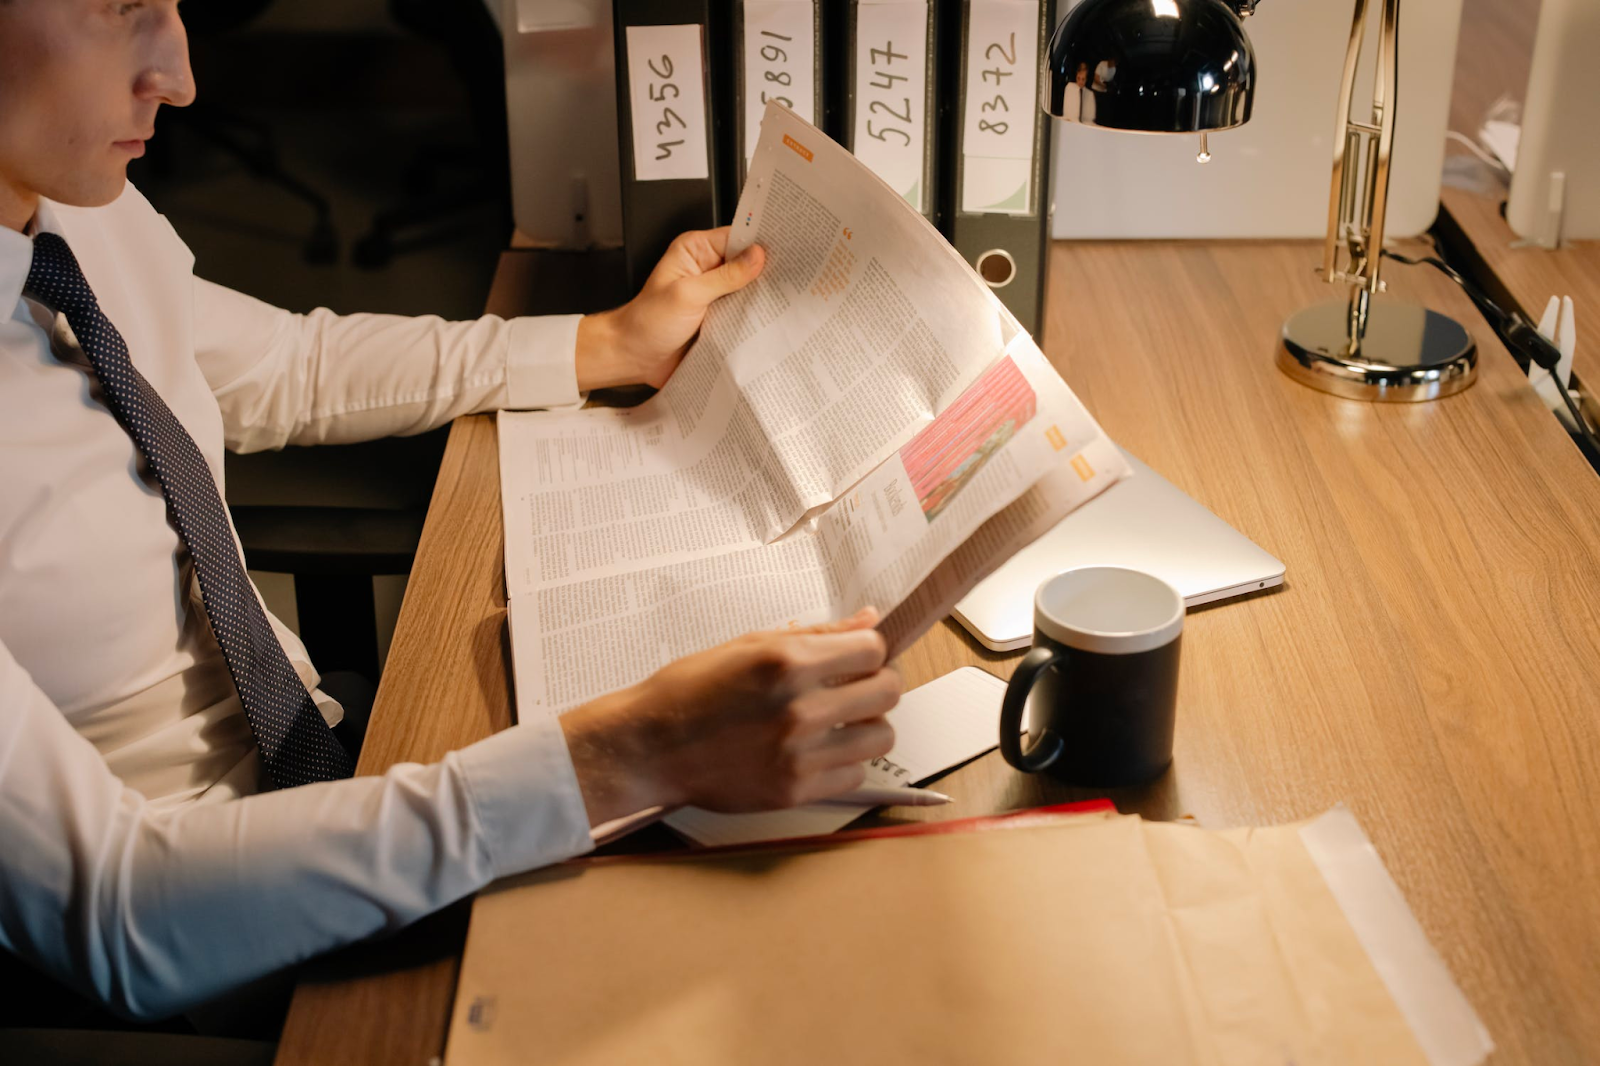 man in shirt and tie reading business publication newspaper with coffee mug at his desk considering how to get local business